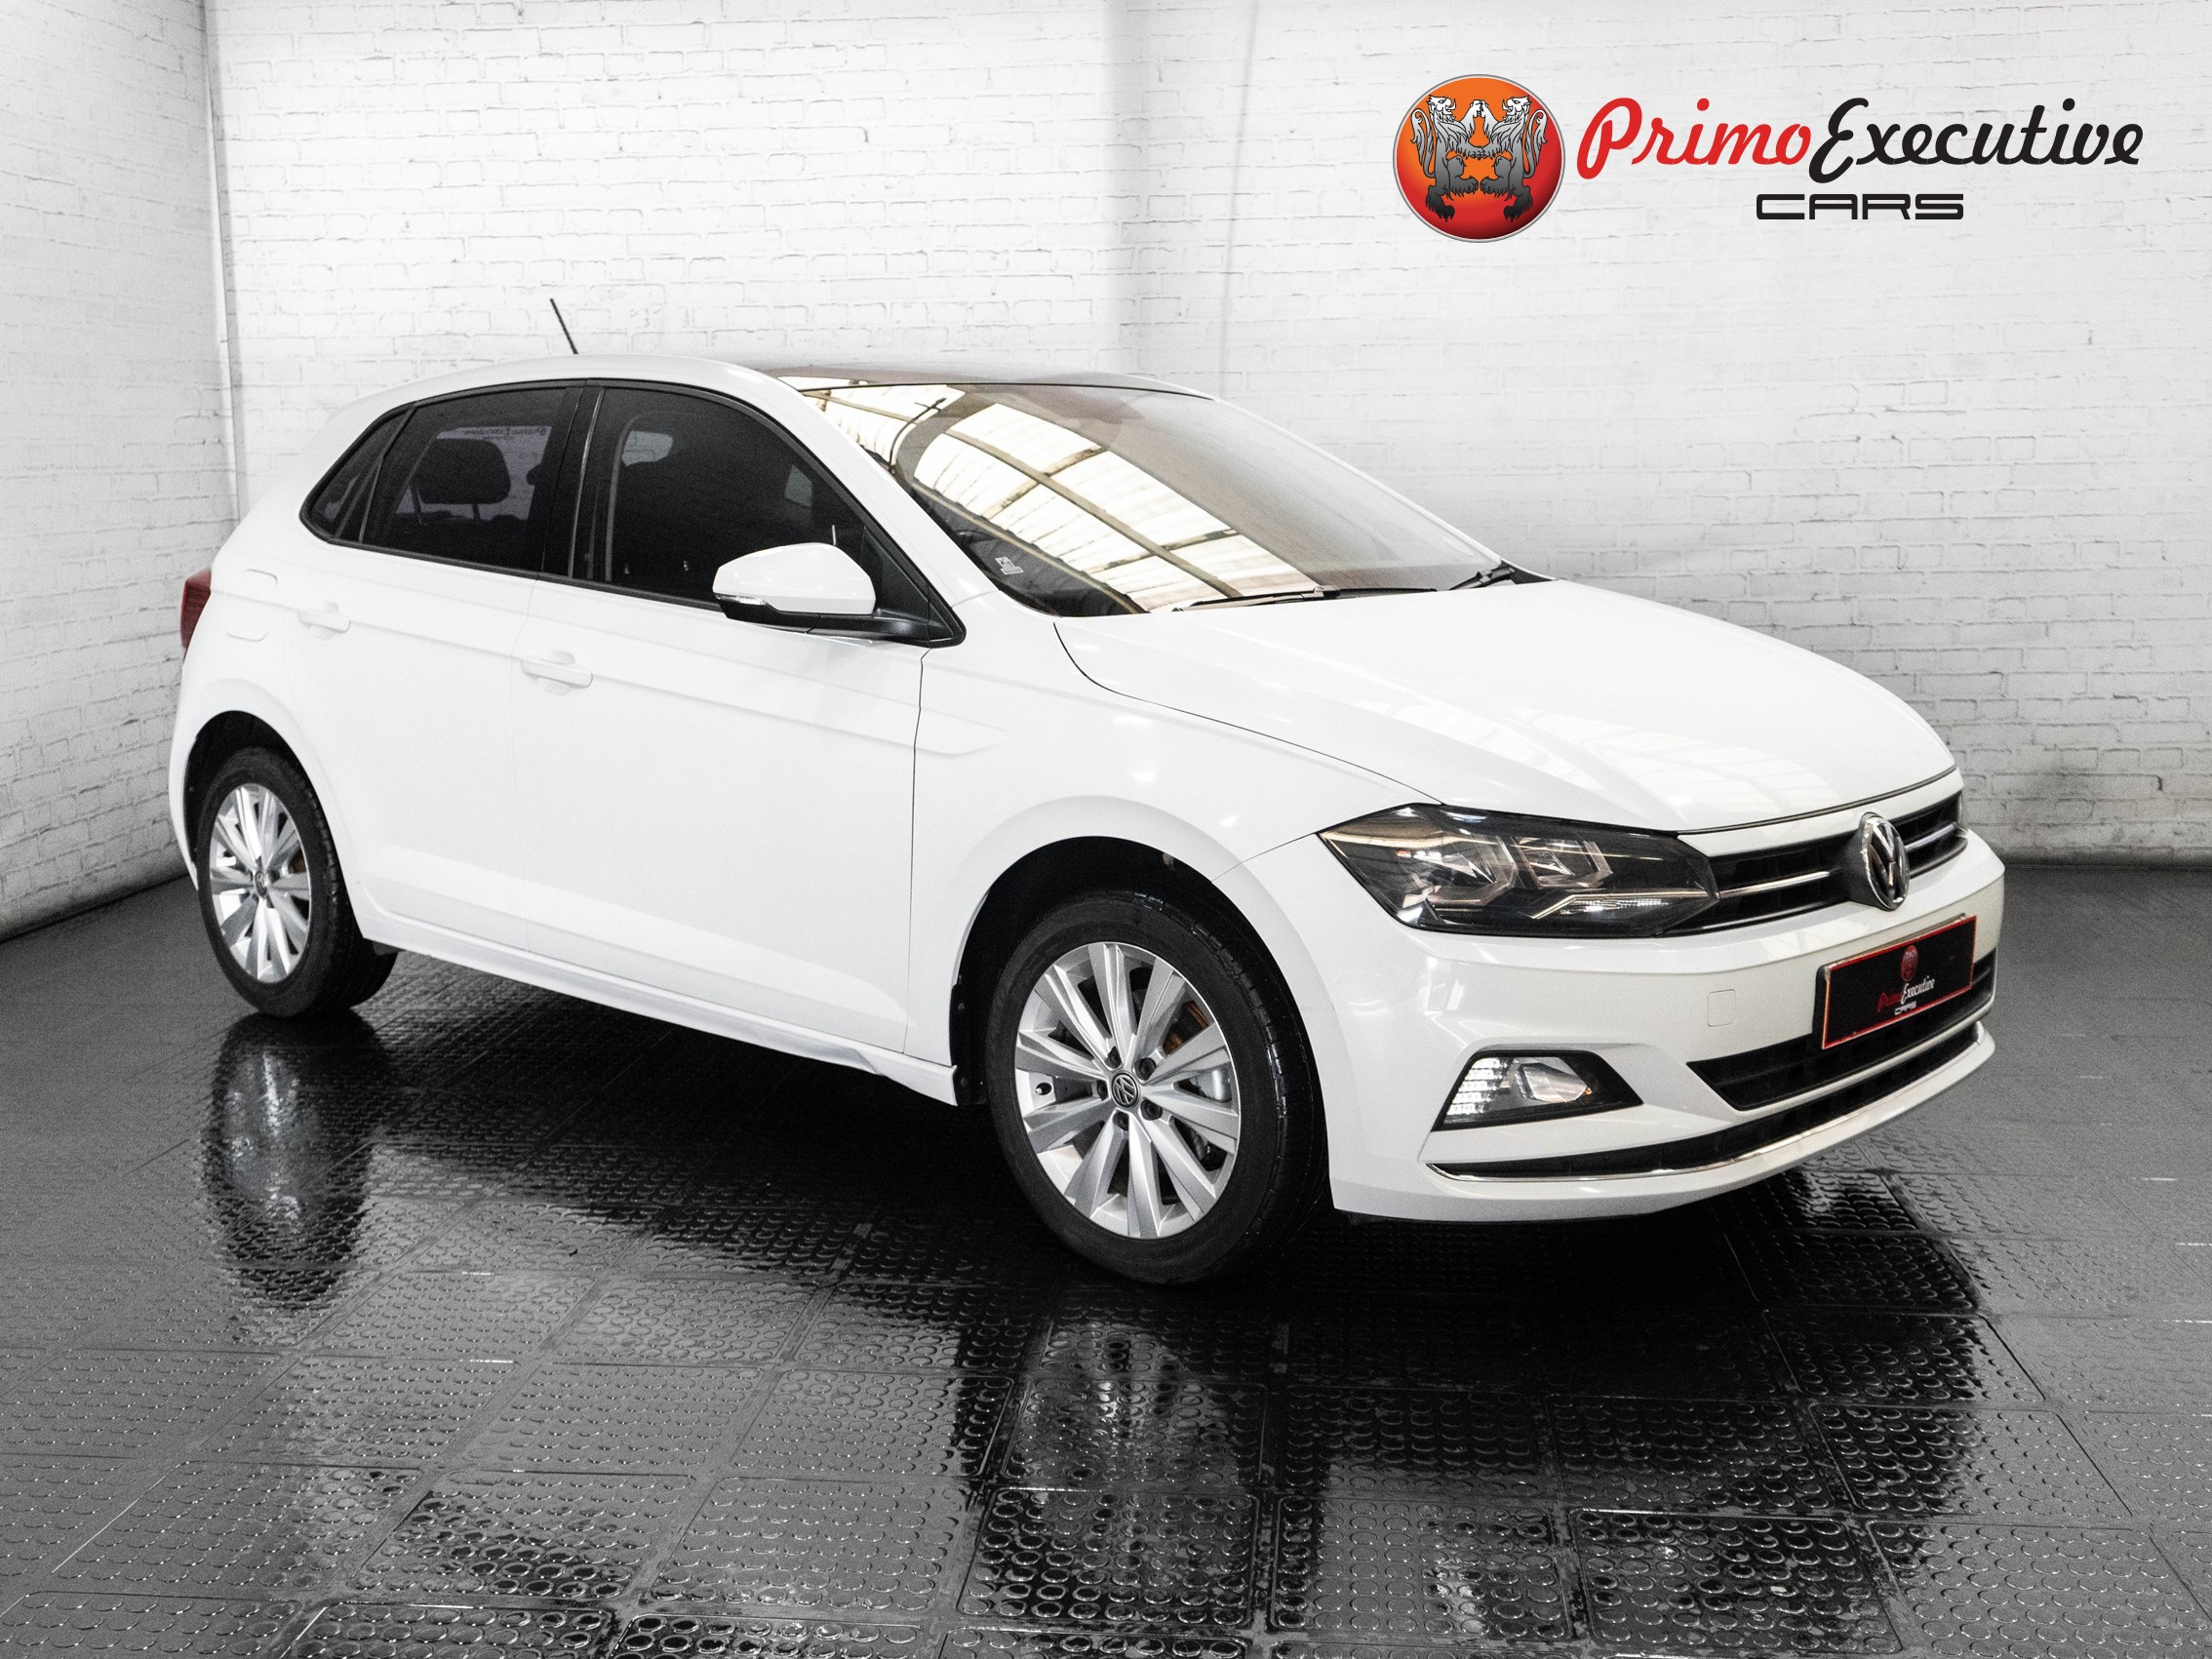 2018 Volkswagen Polo Hatch  for sale - 510502